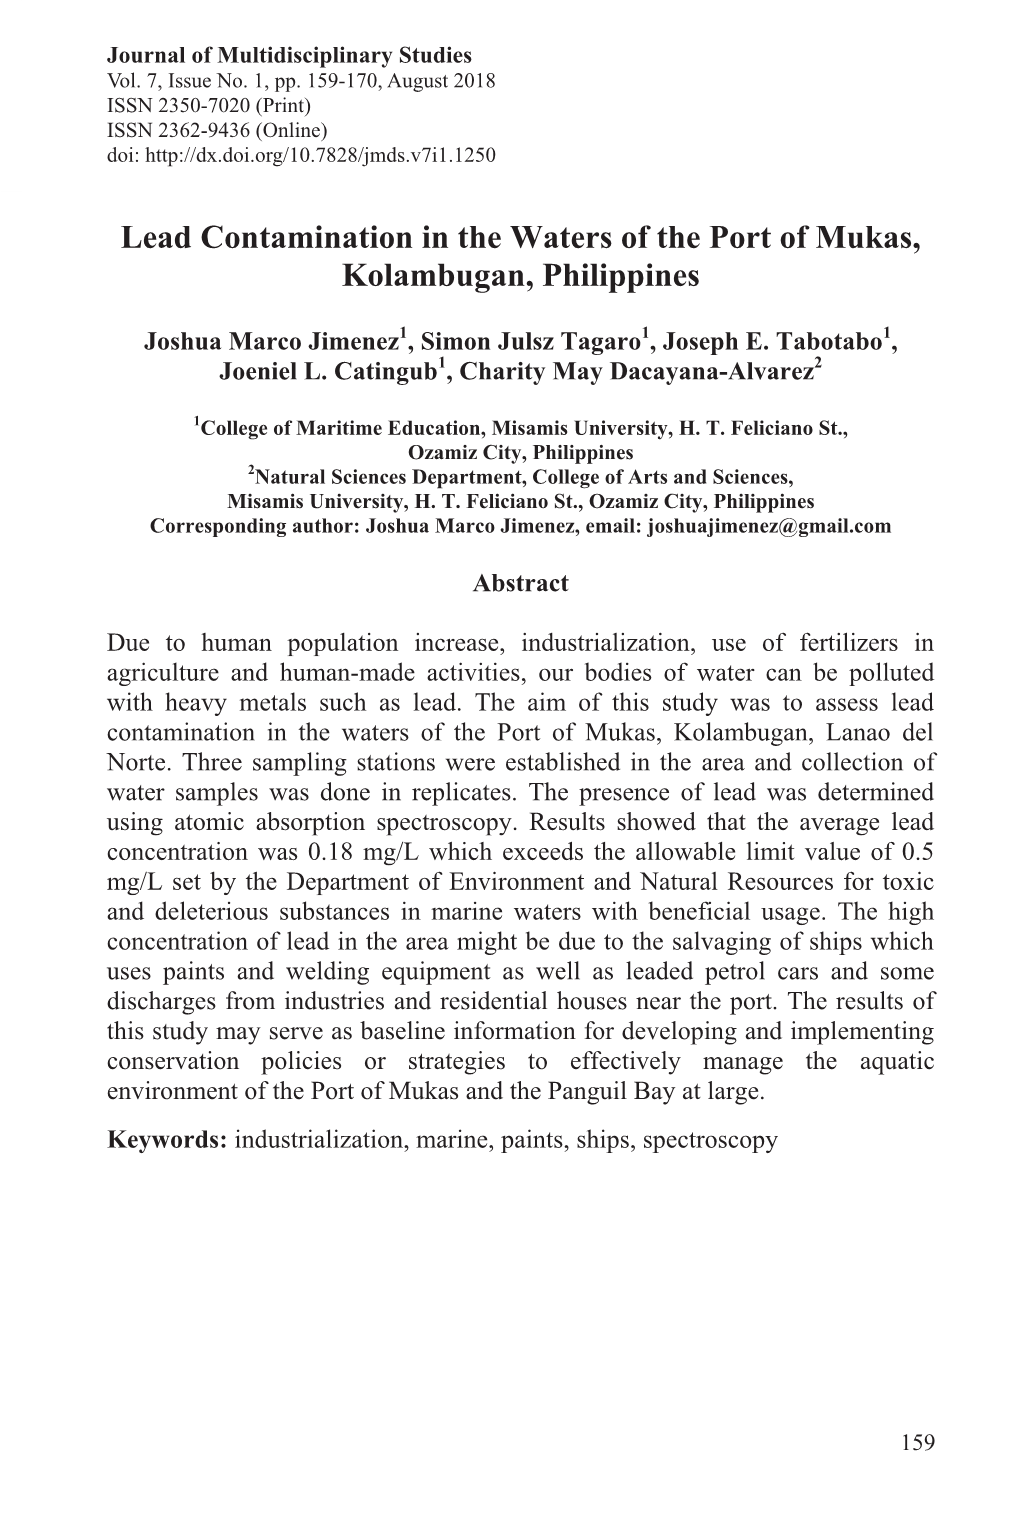 Lead Contamination in the Waters of the Port of Mukas, Kolambugan, Philippines